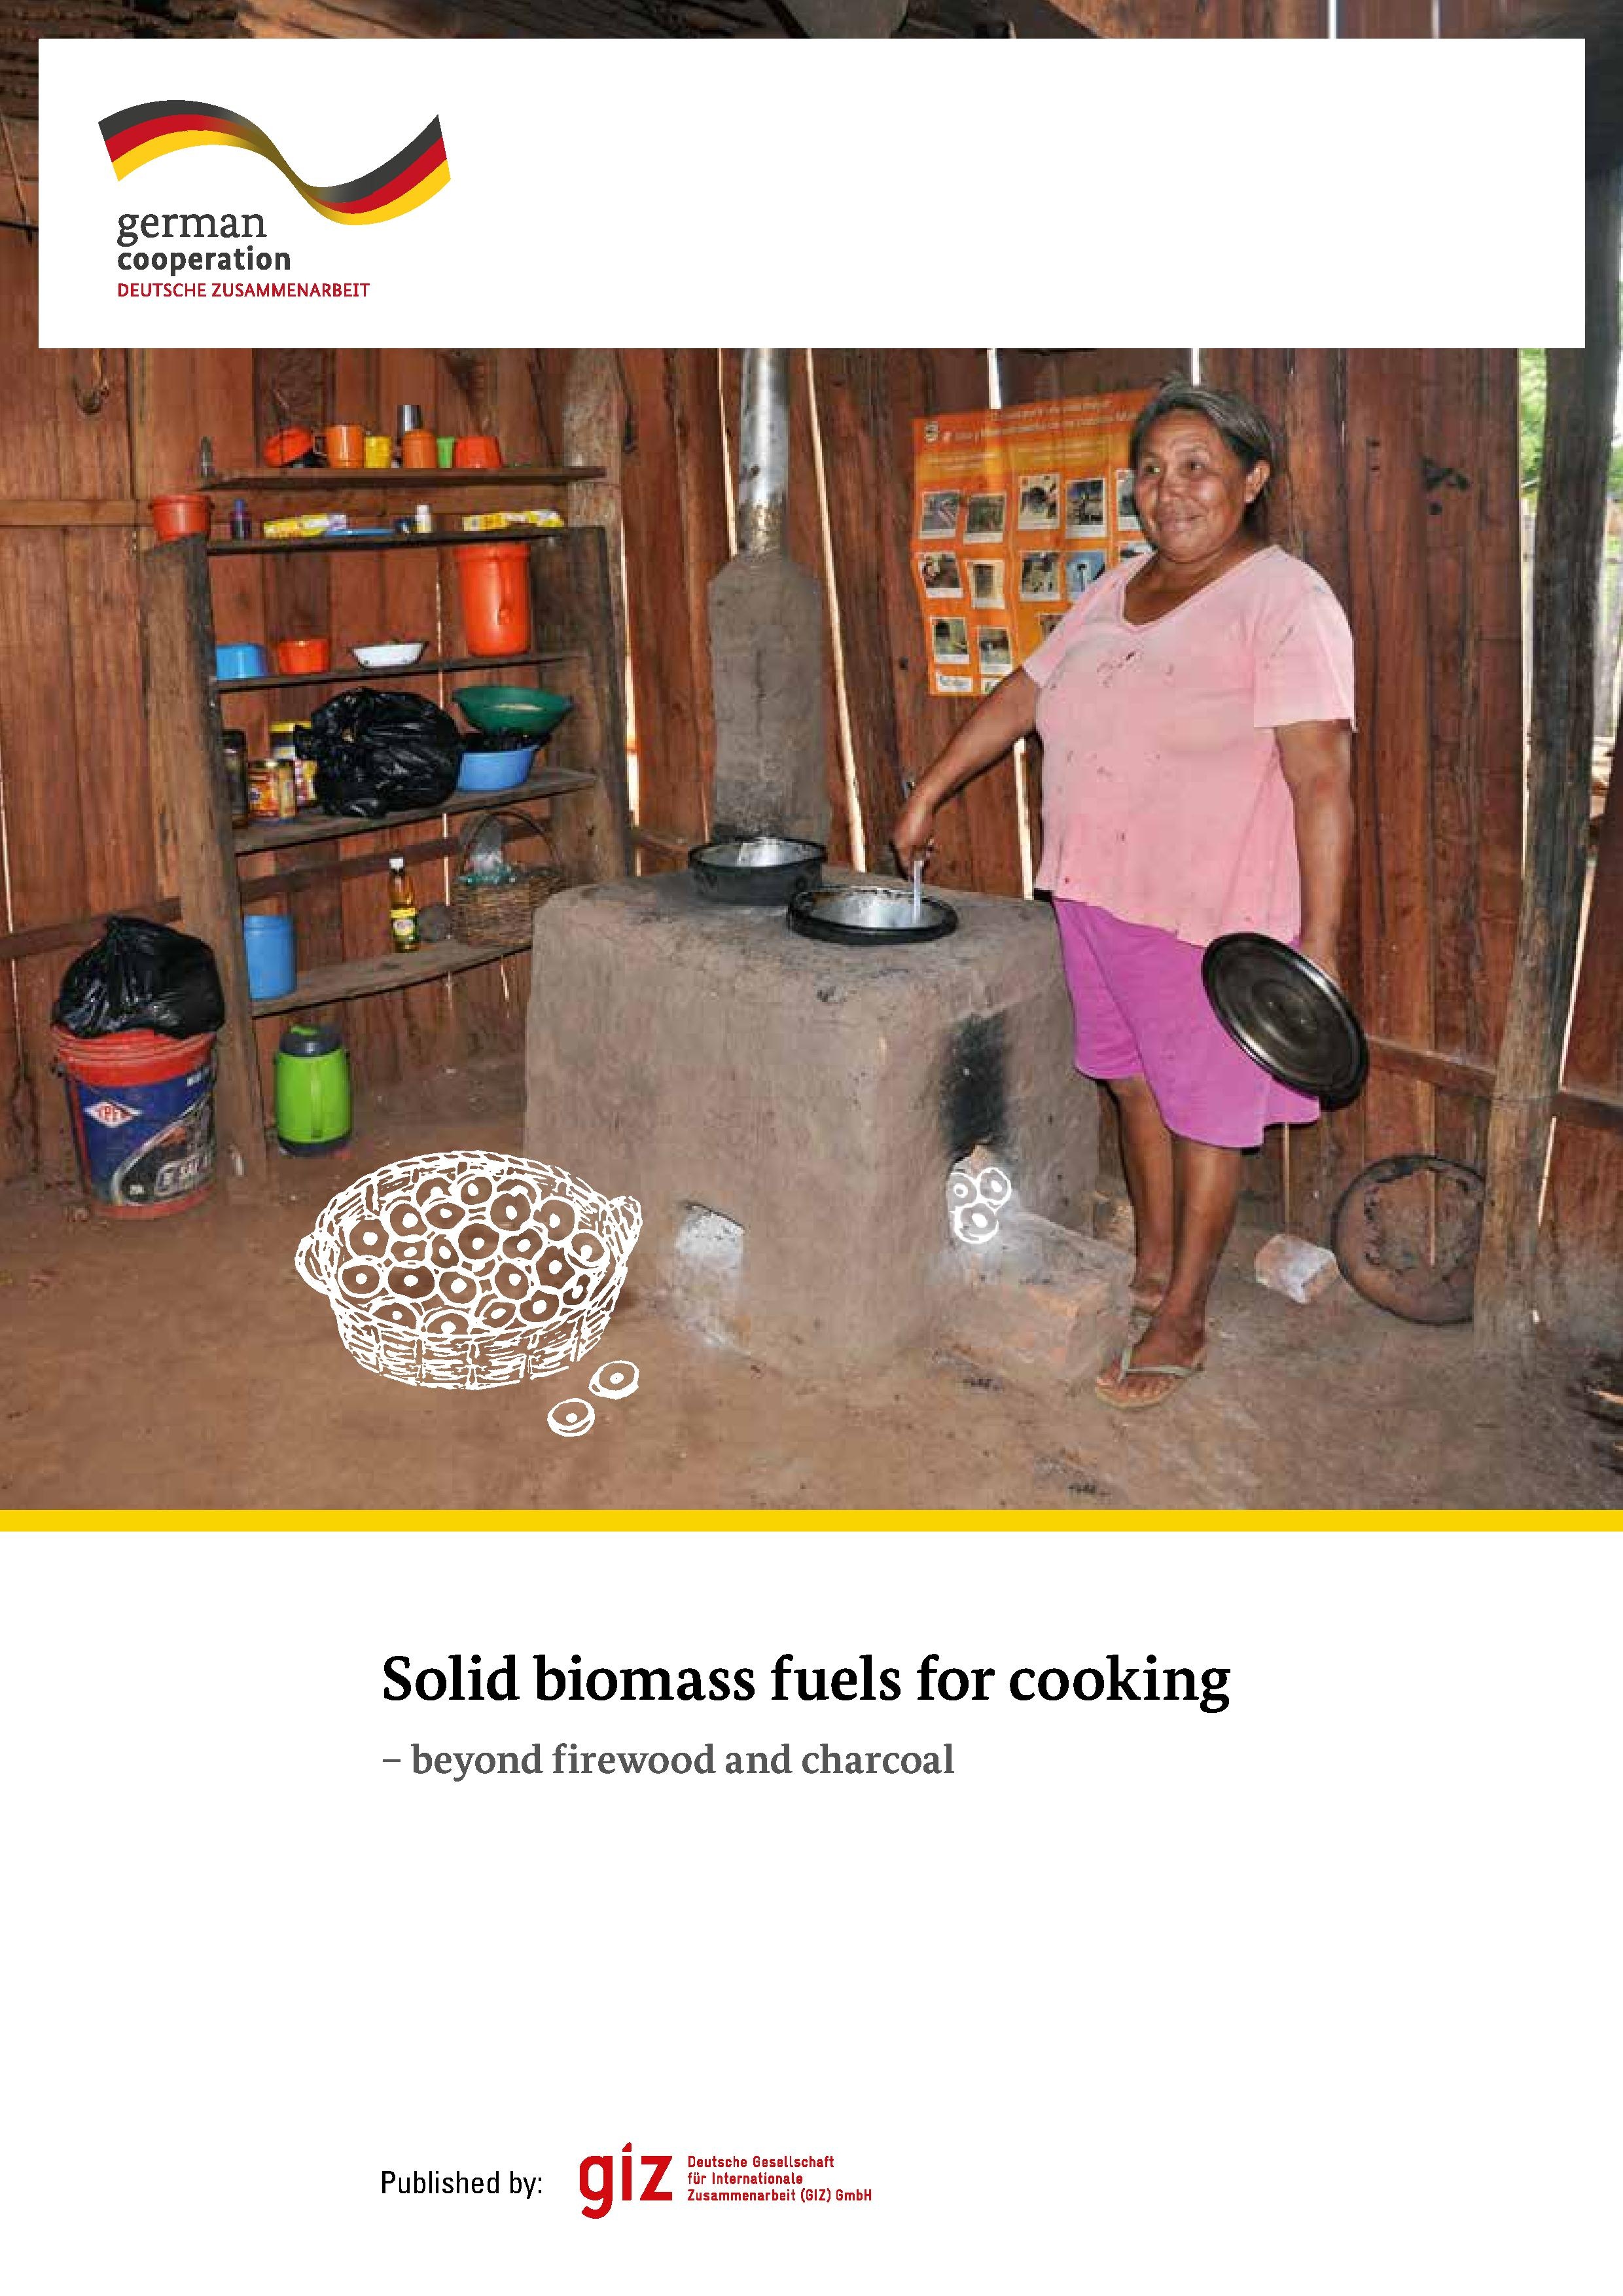 File:Solid biomass fuels for cooking - beyond firewood and charcoal. GIZ 2017.pdf